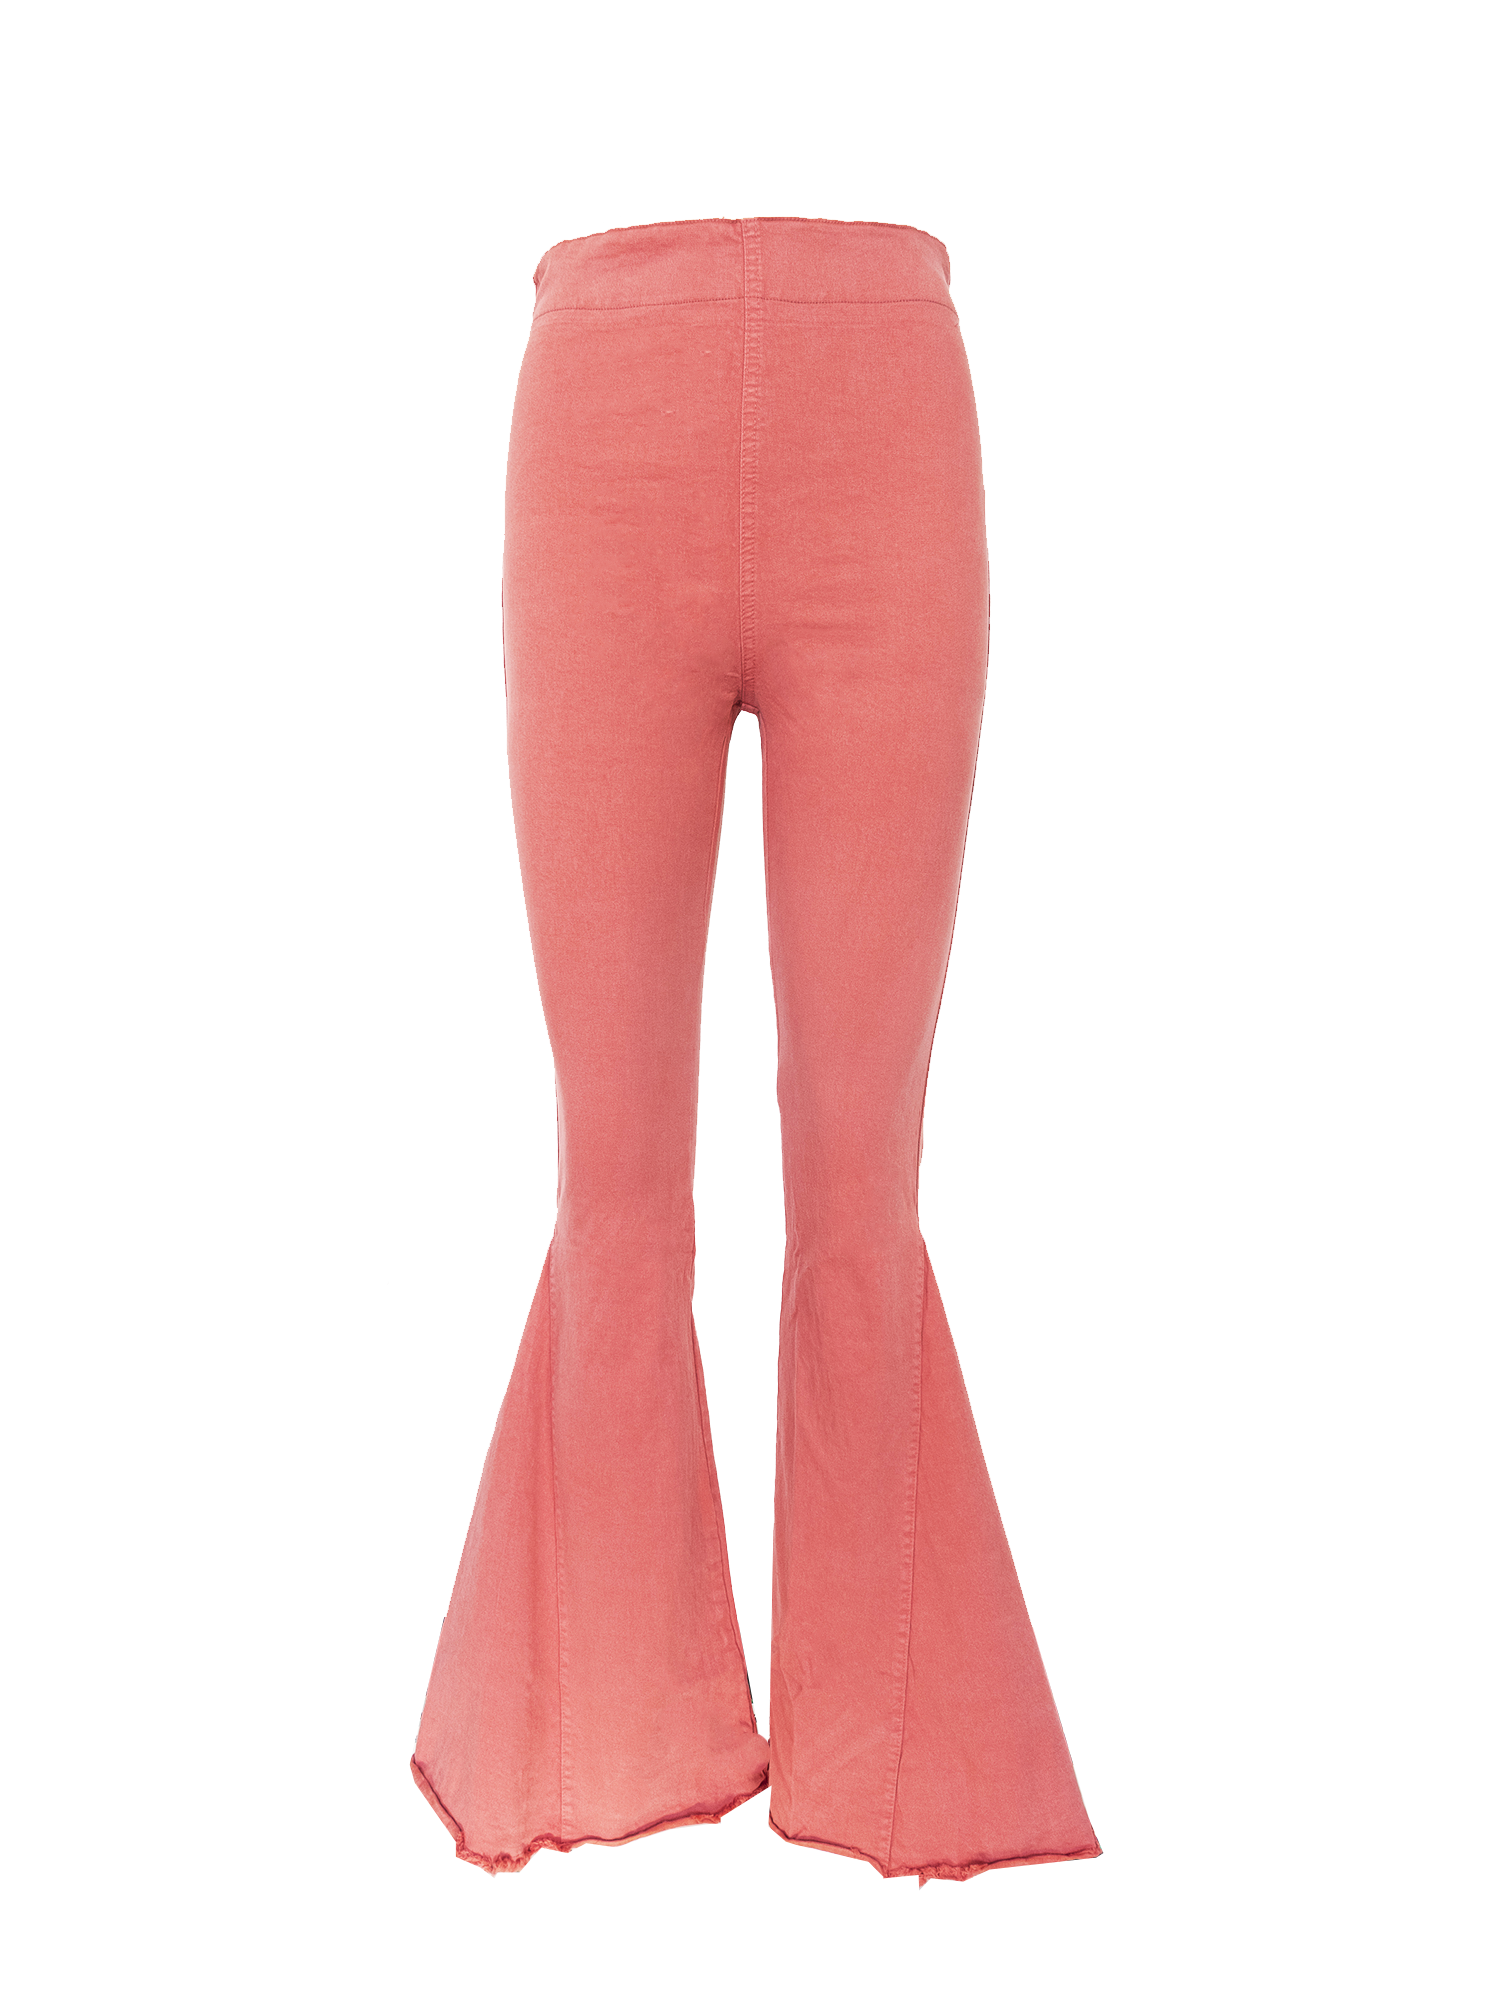 LOLISSIMA - flared trousers in brick red cotton